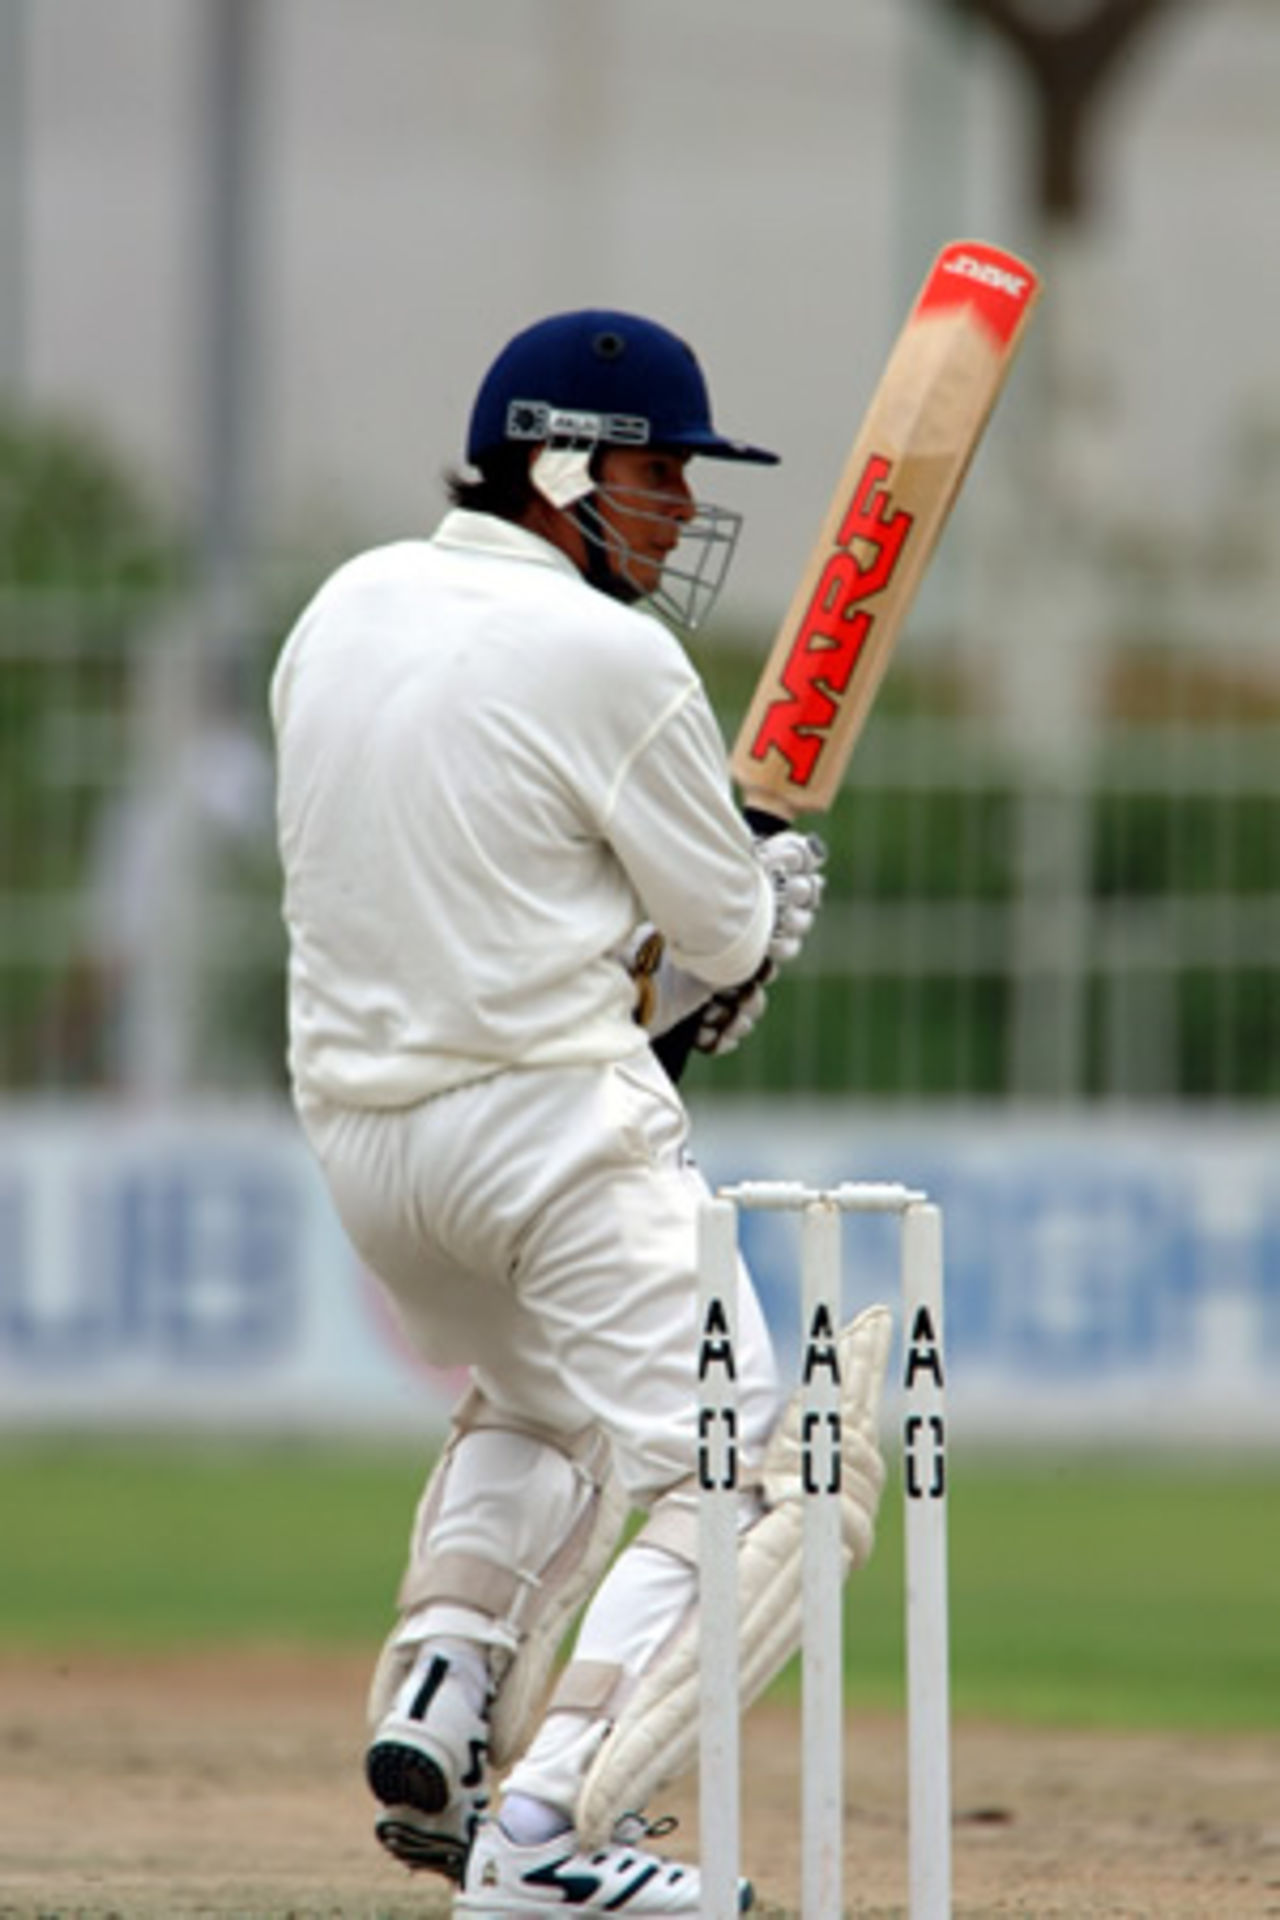 Nepal's Yashwant Subedi steers a ball on his way to 40, Nepal Under-19s v Singapore Under-19s at Asghar Ali Shah Stadium Karachi, Youth Asia Cup 2003, 22 July 2003.